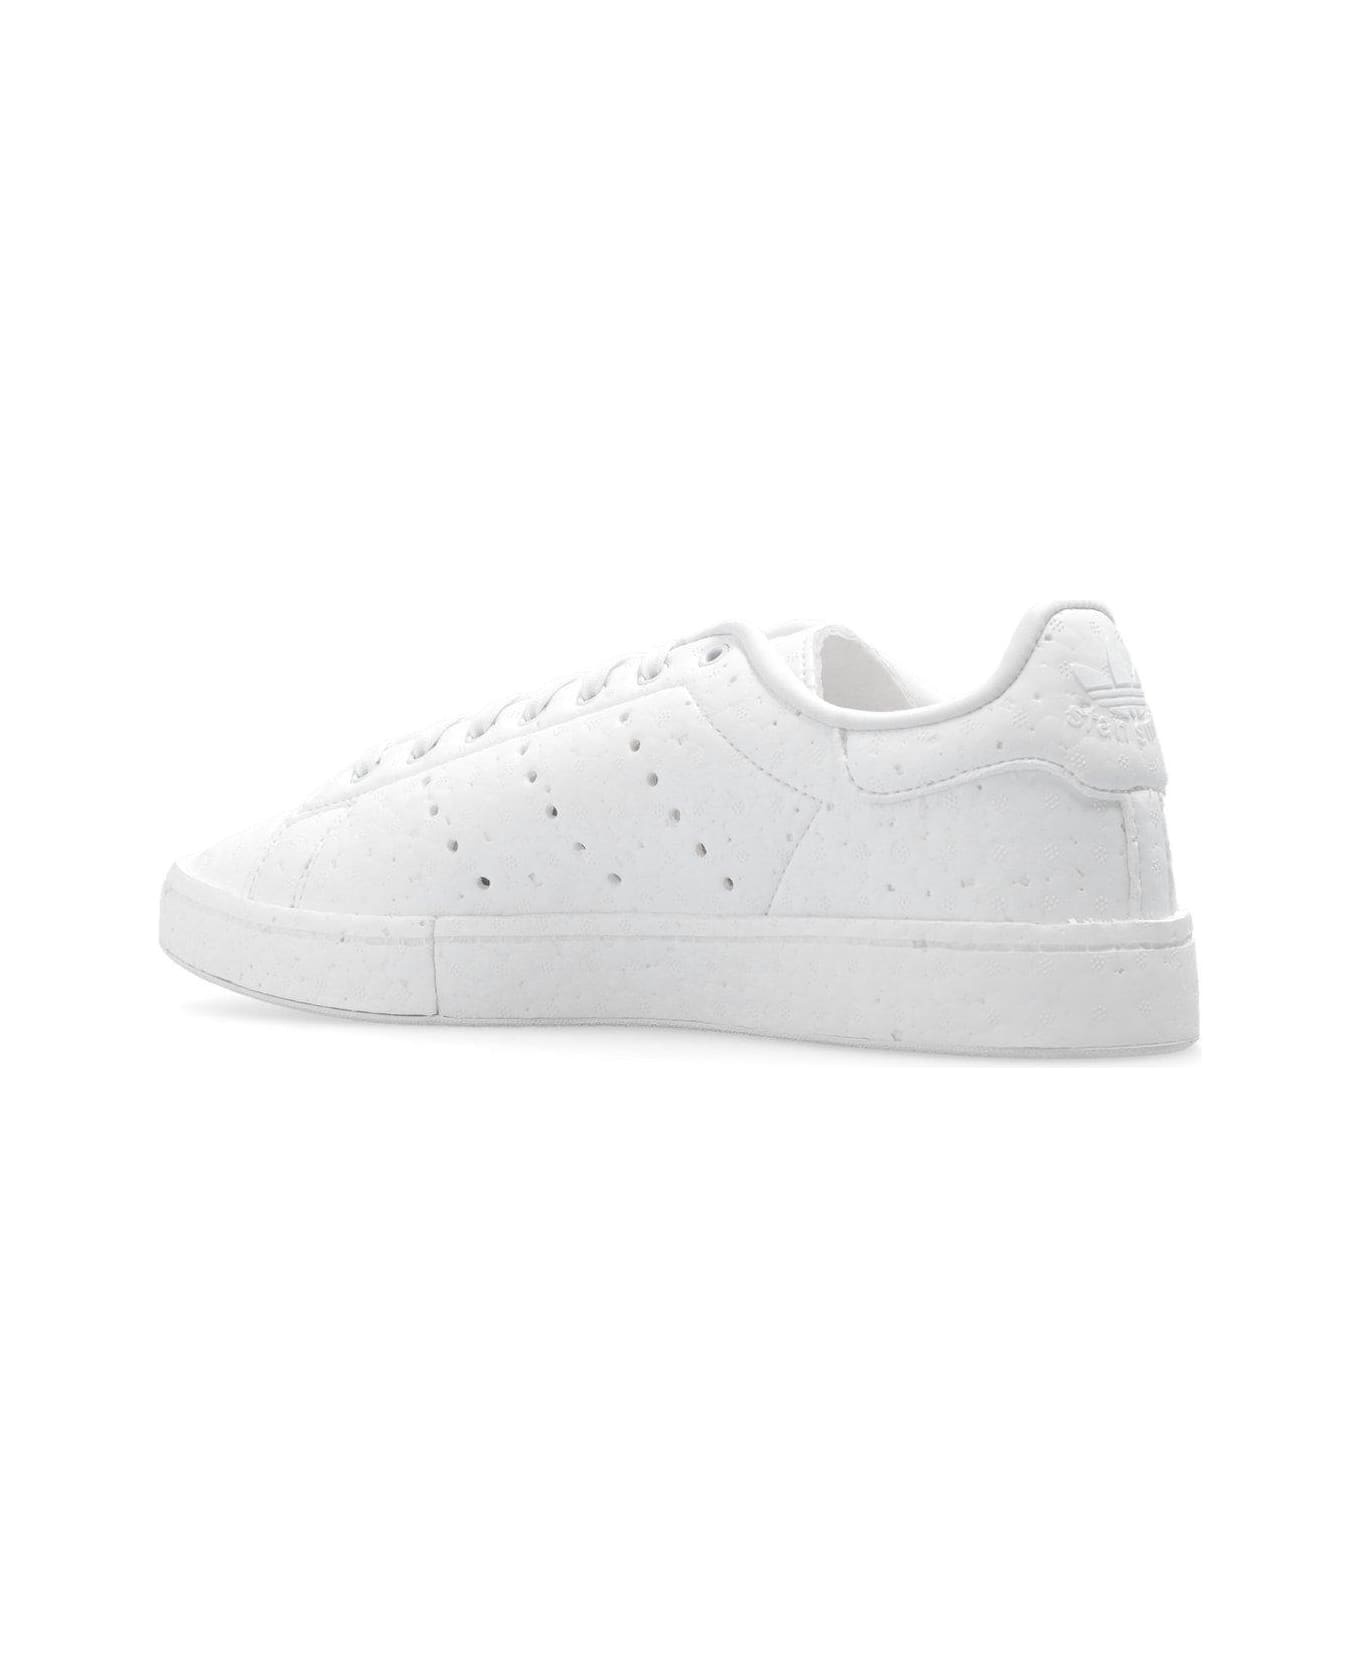 Adidas Originals by Craig Green X Craig Green Stan Smith Lace-up Sneakers - WHITE スニーカー